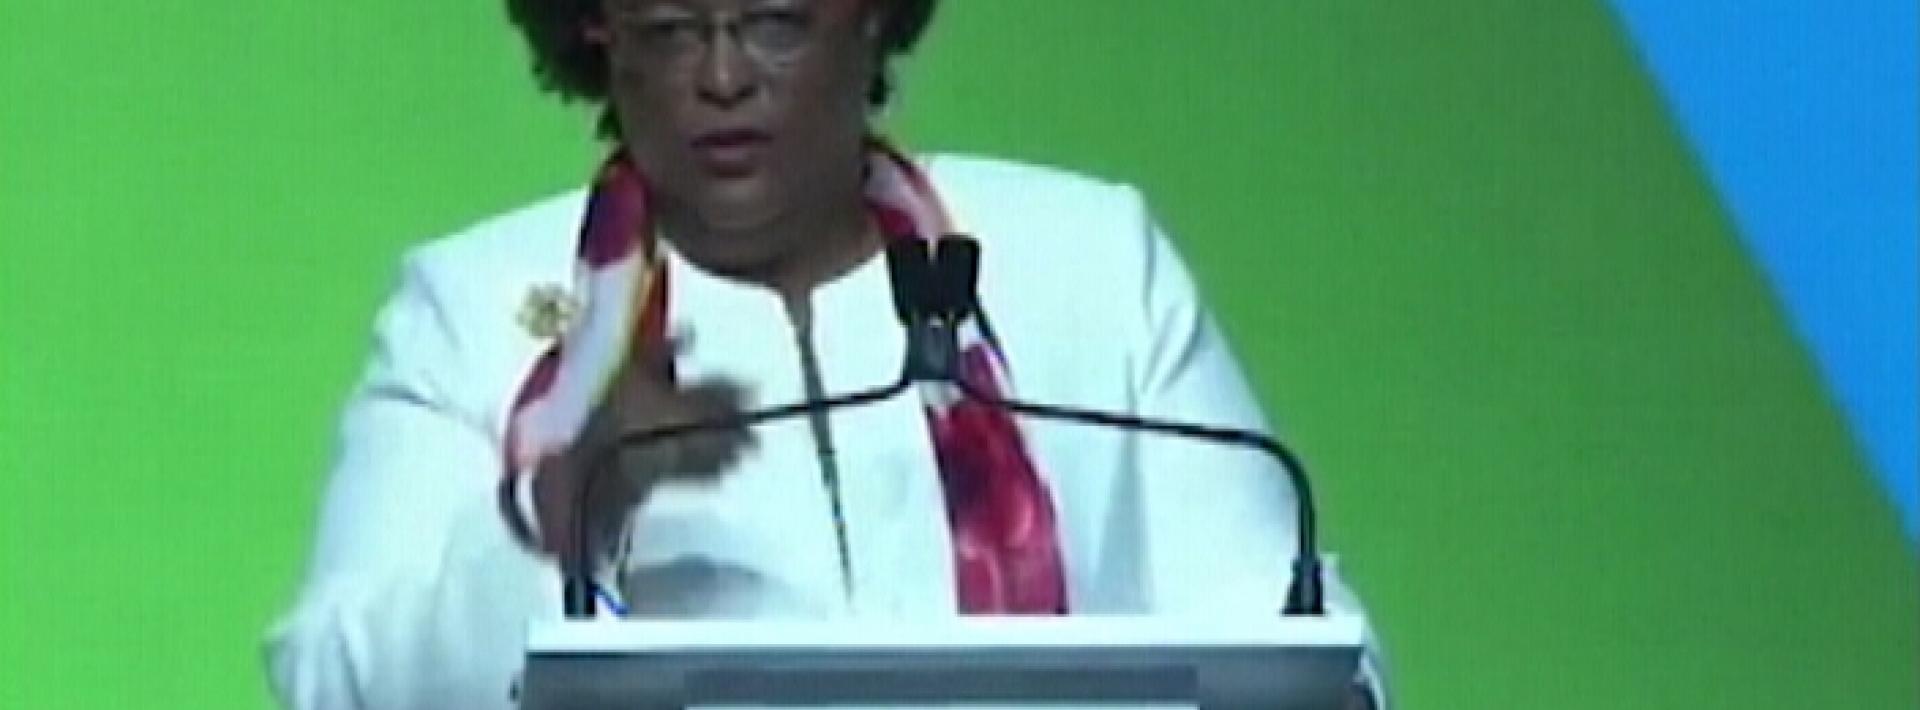 Barbados leader calls for support for the Caribbean at global climate summit